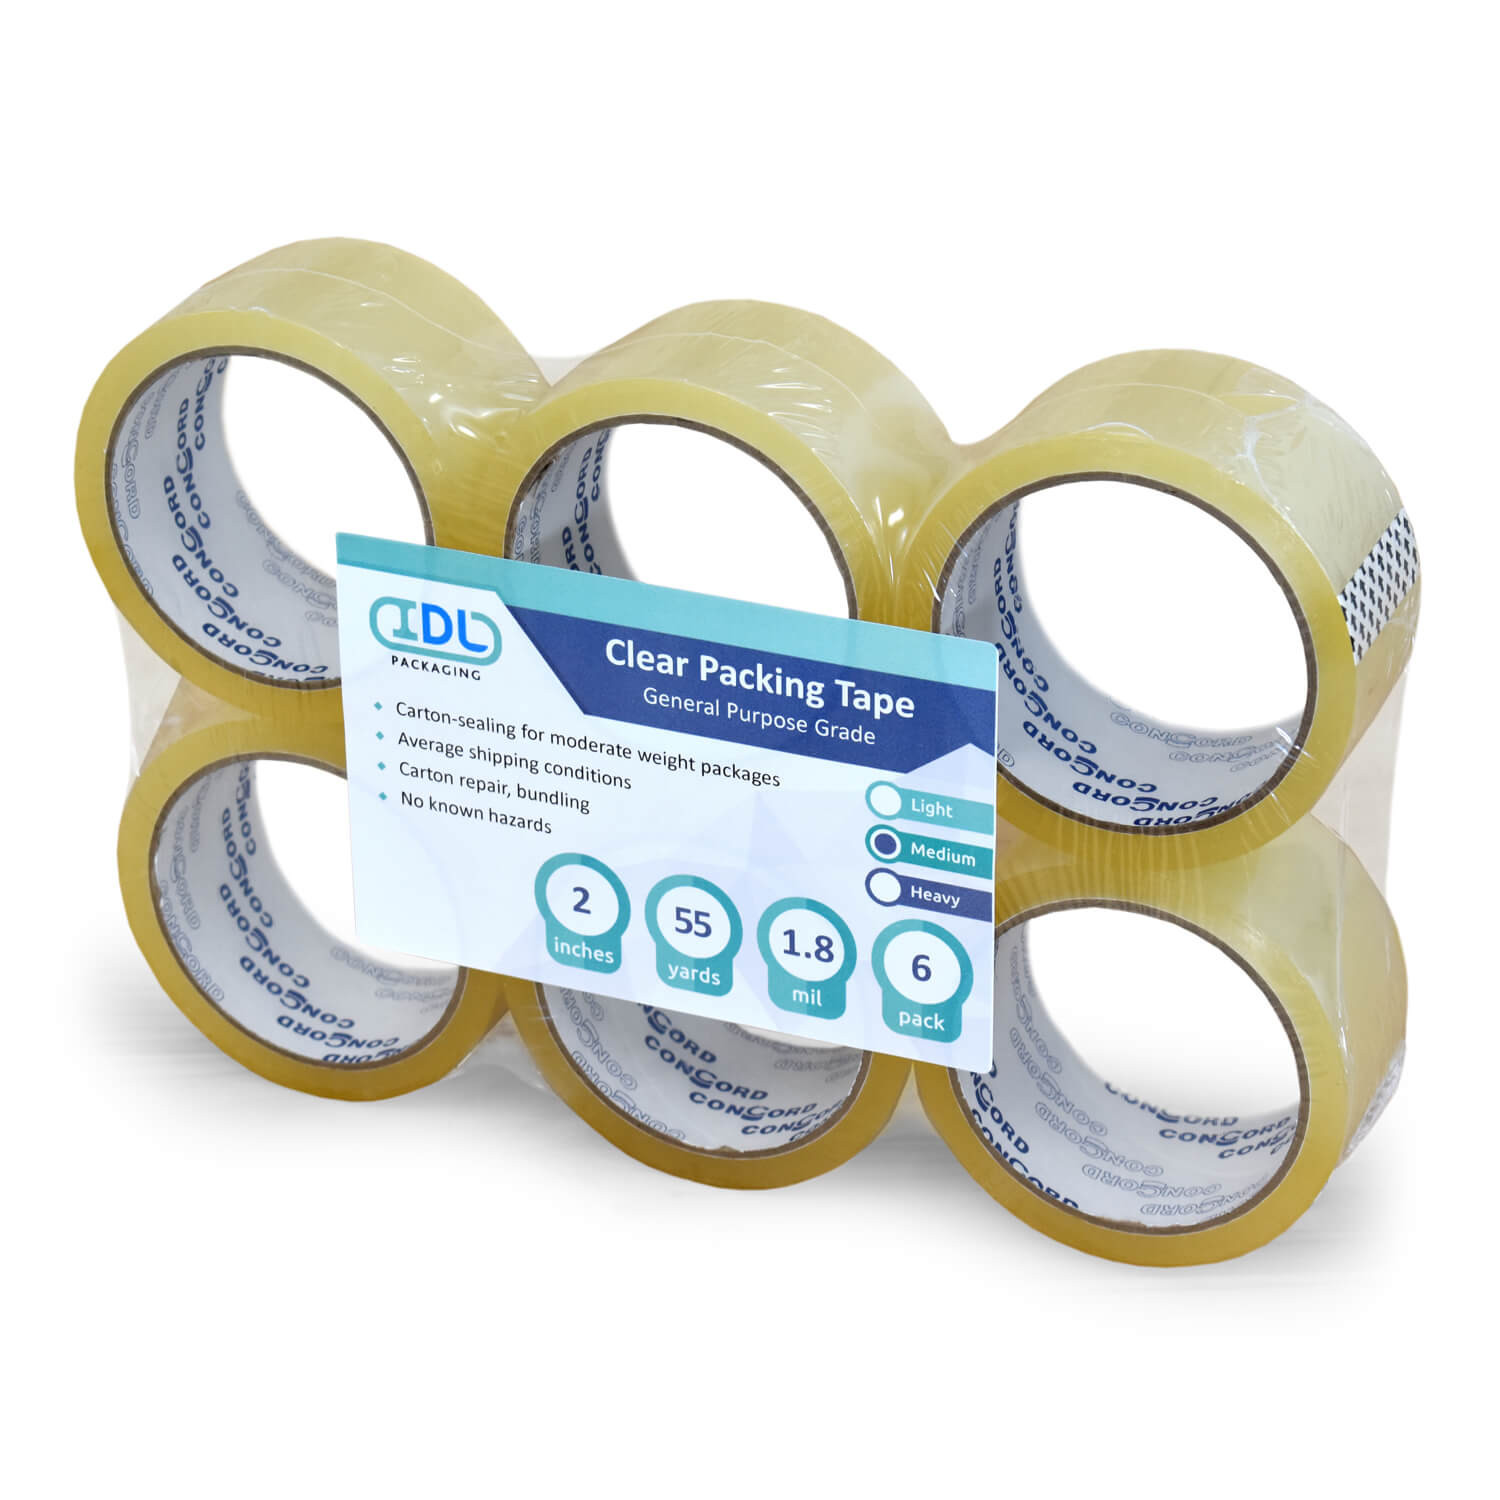  Scotch Heavy Duty Packaging Tape, 2 Inches x 800 Inches, Clear  - 2 Count : Office Products